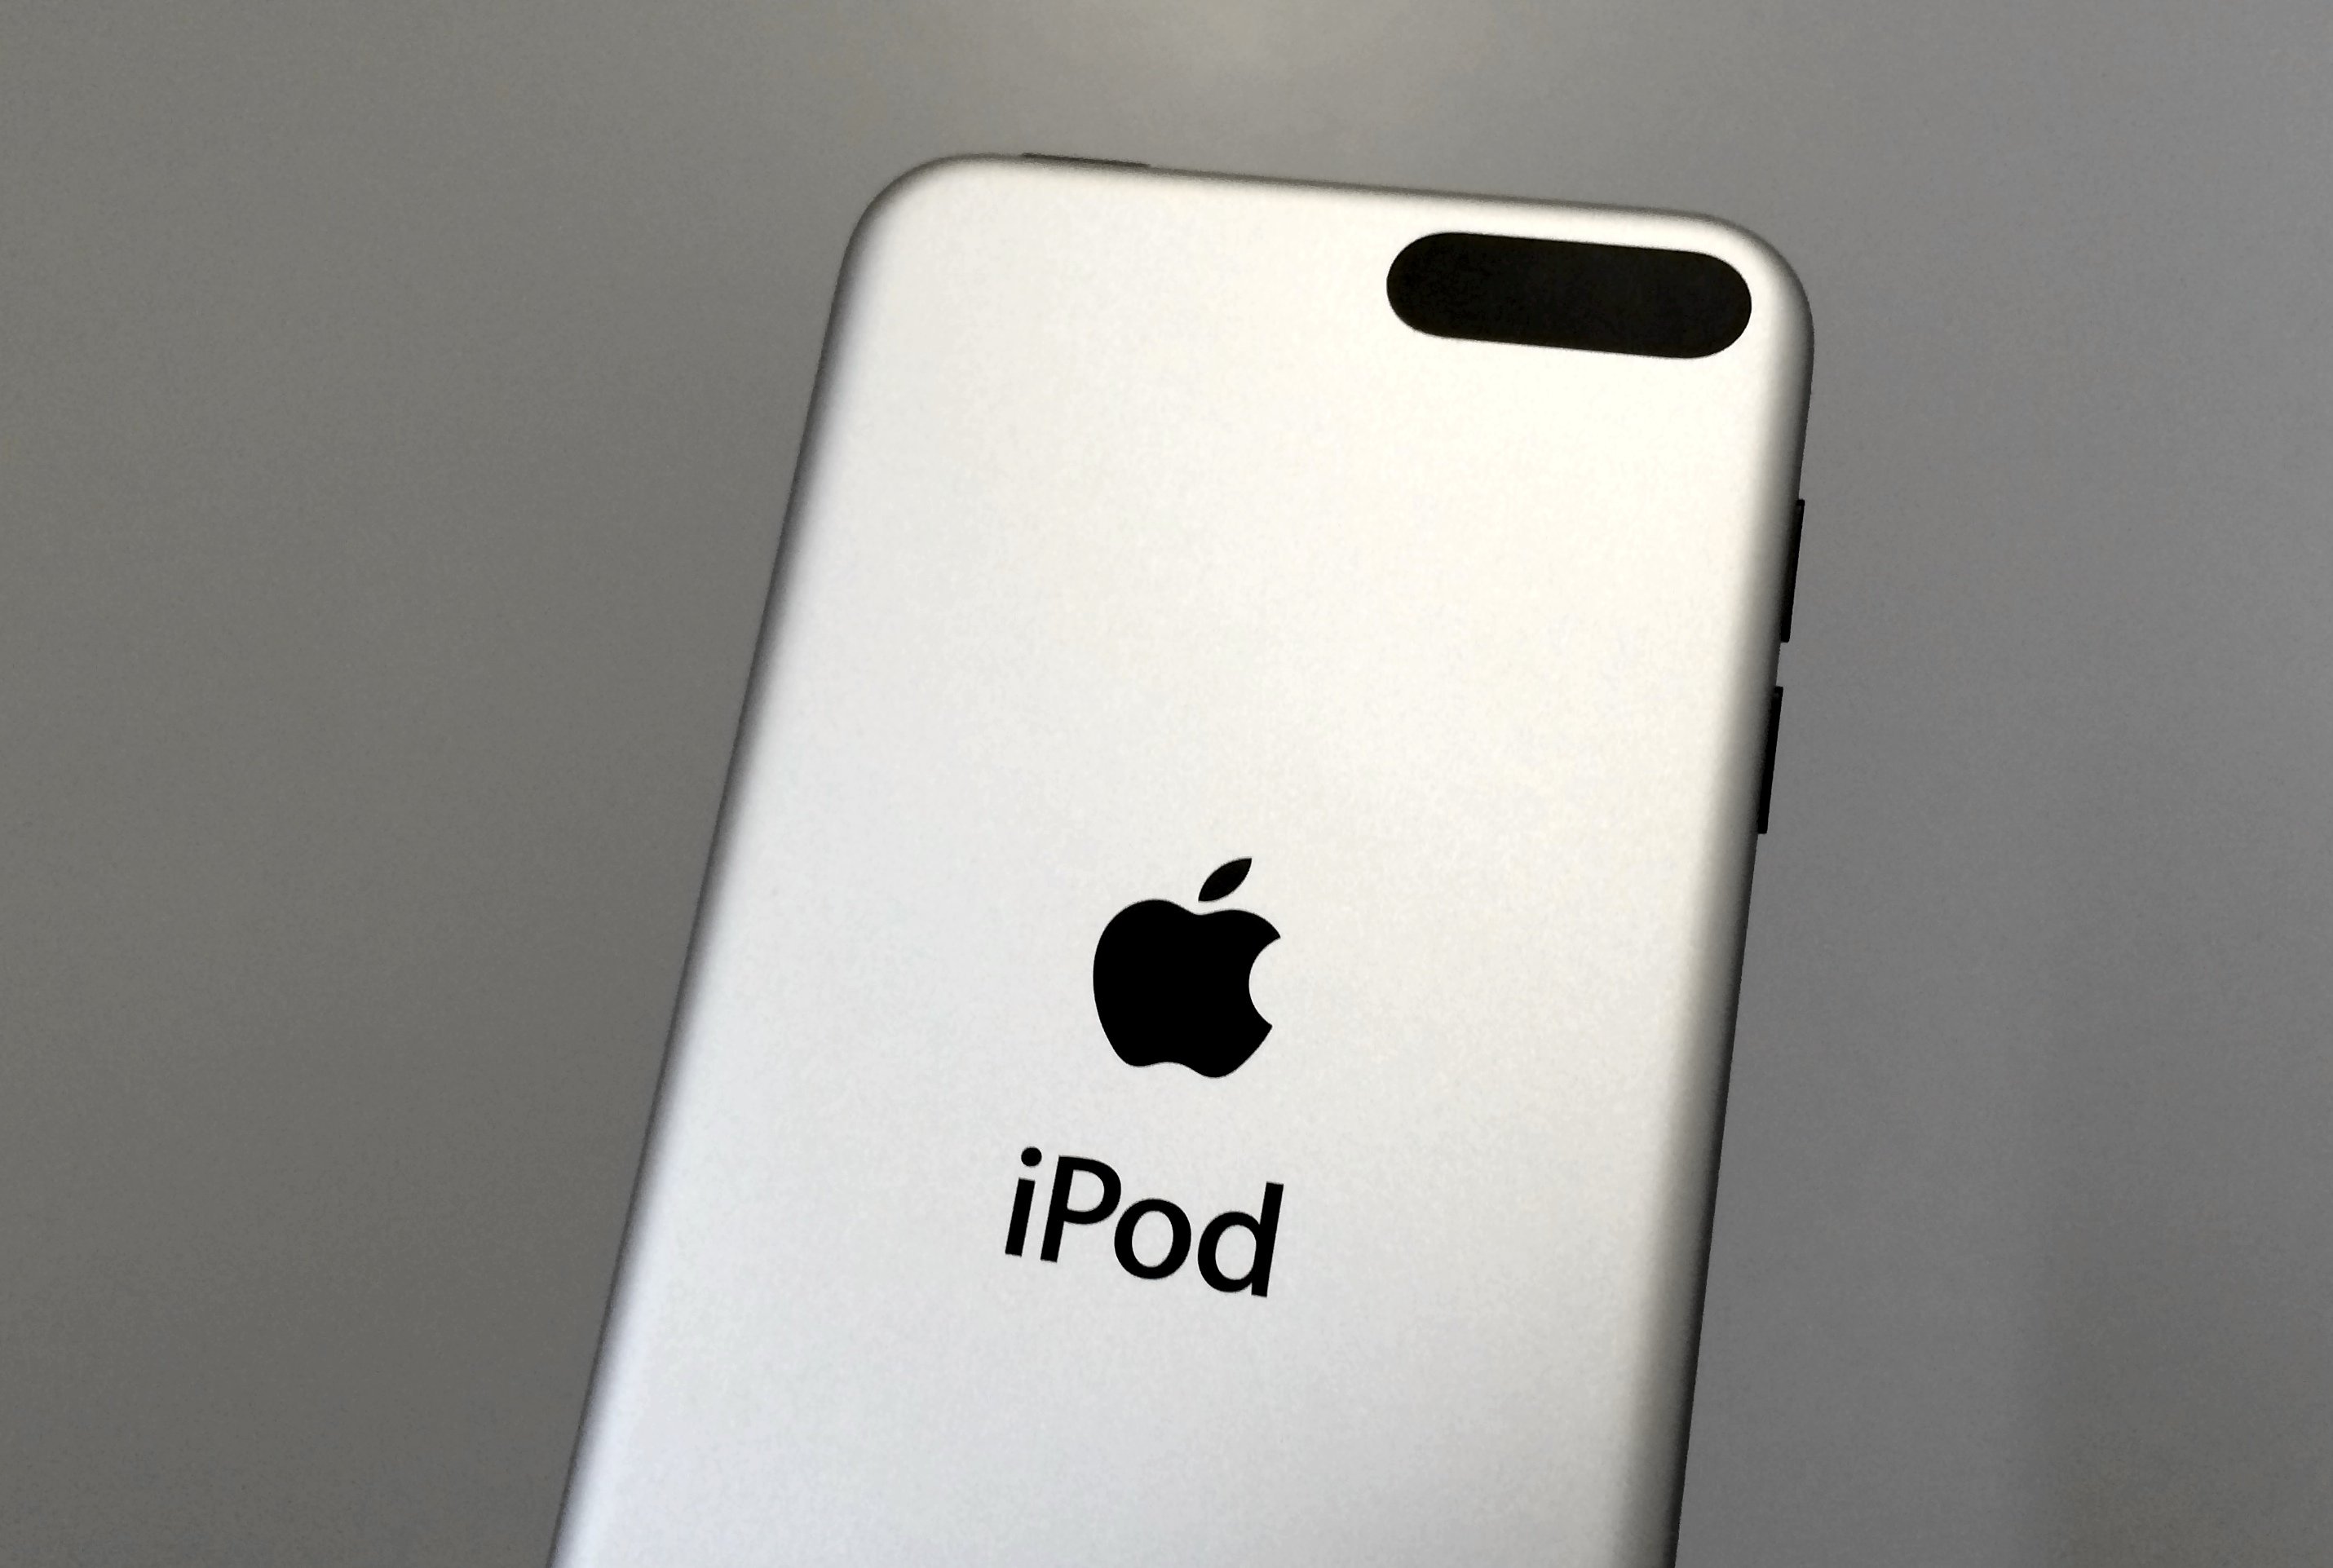 We could finally learn about the iPod Touch 6th generation release date.